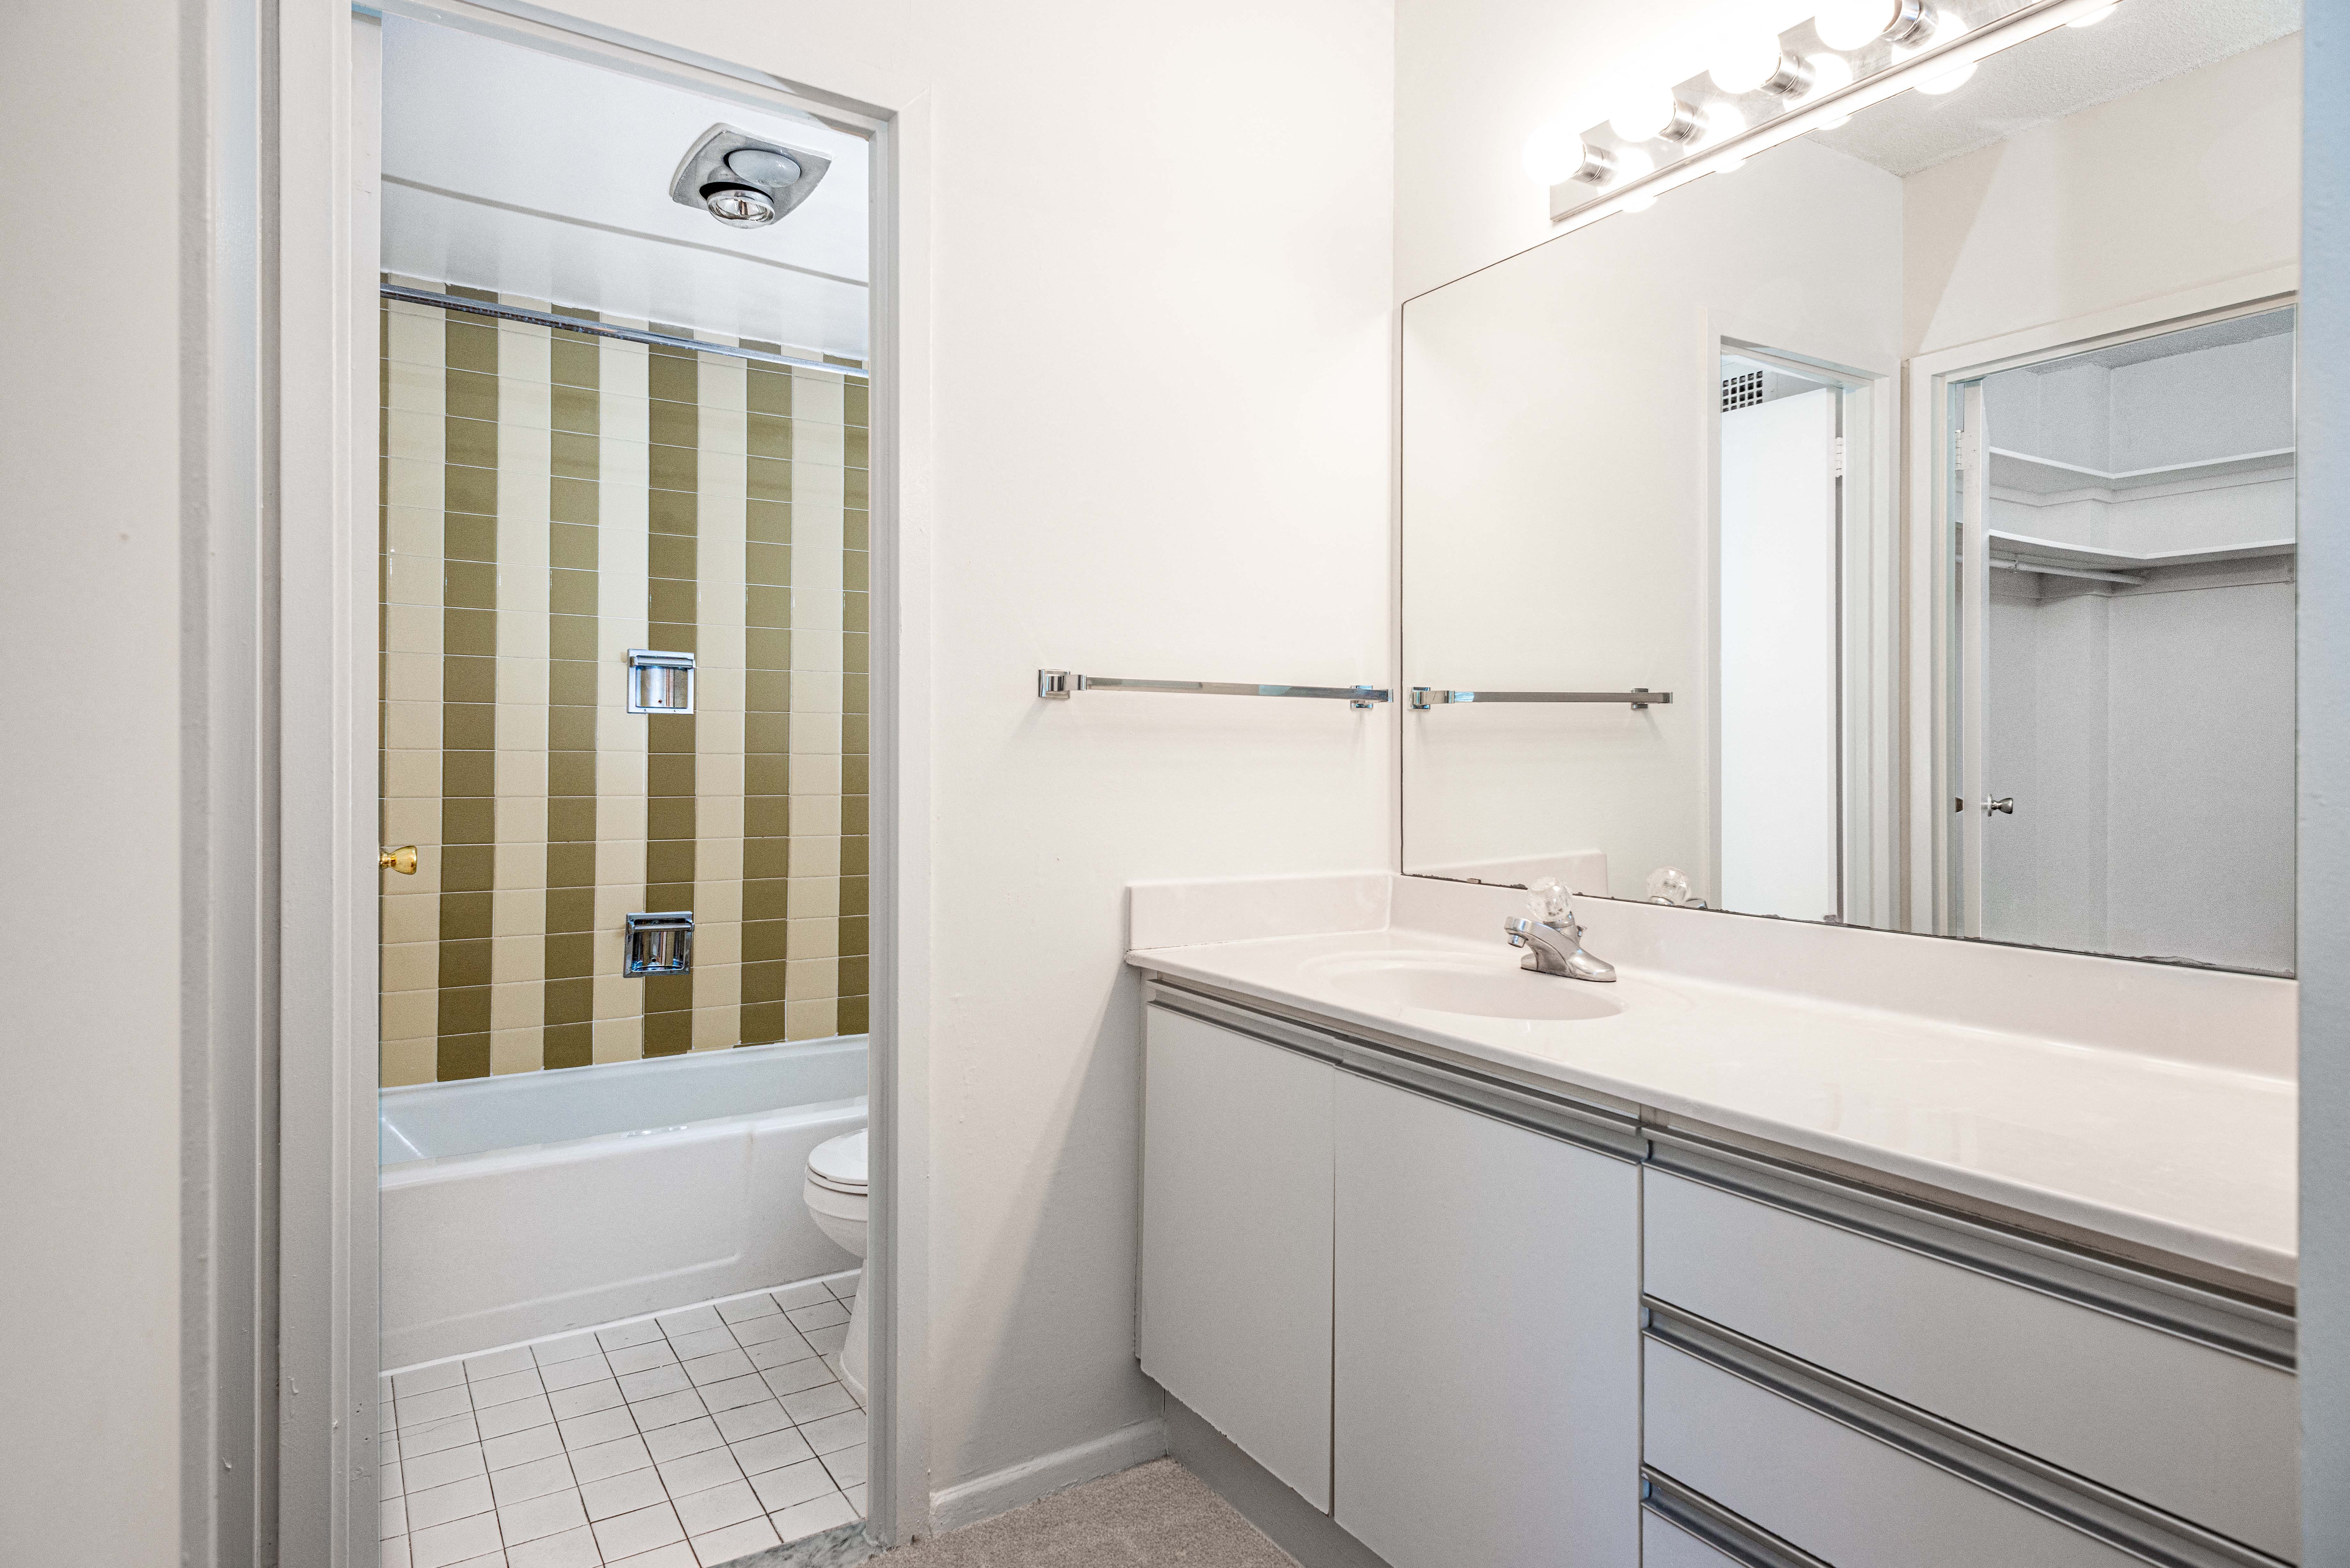 Bathrooms with separate vanity space and built-in lighting